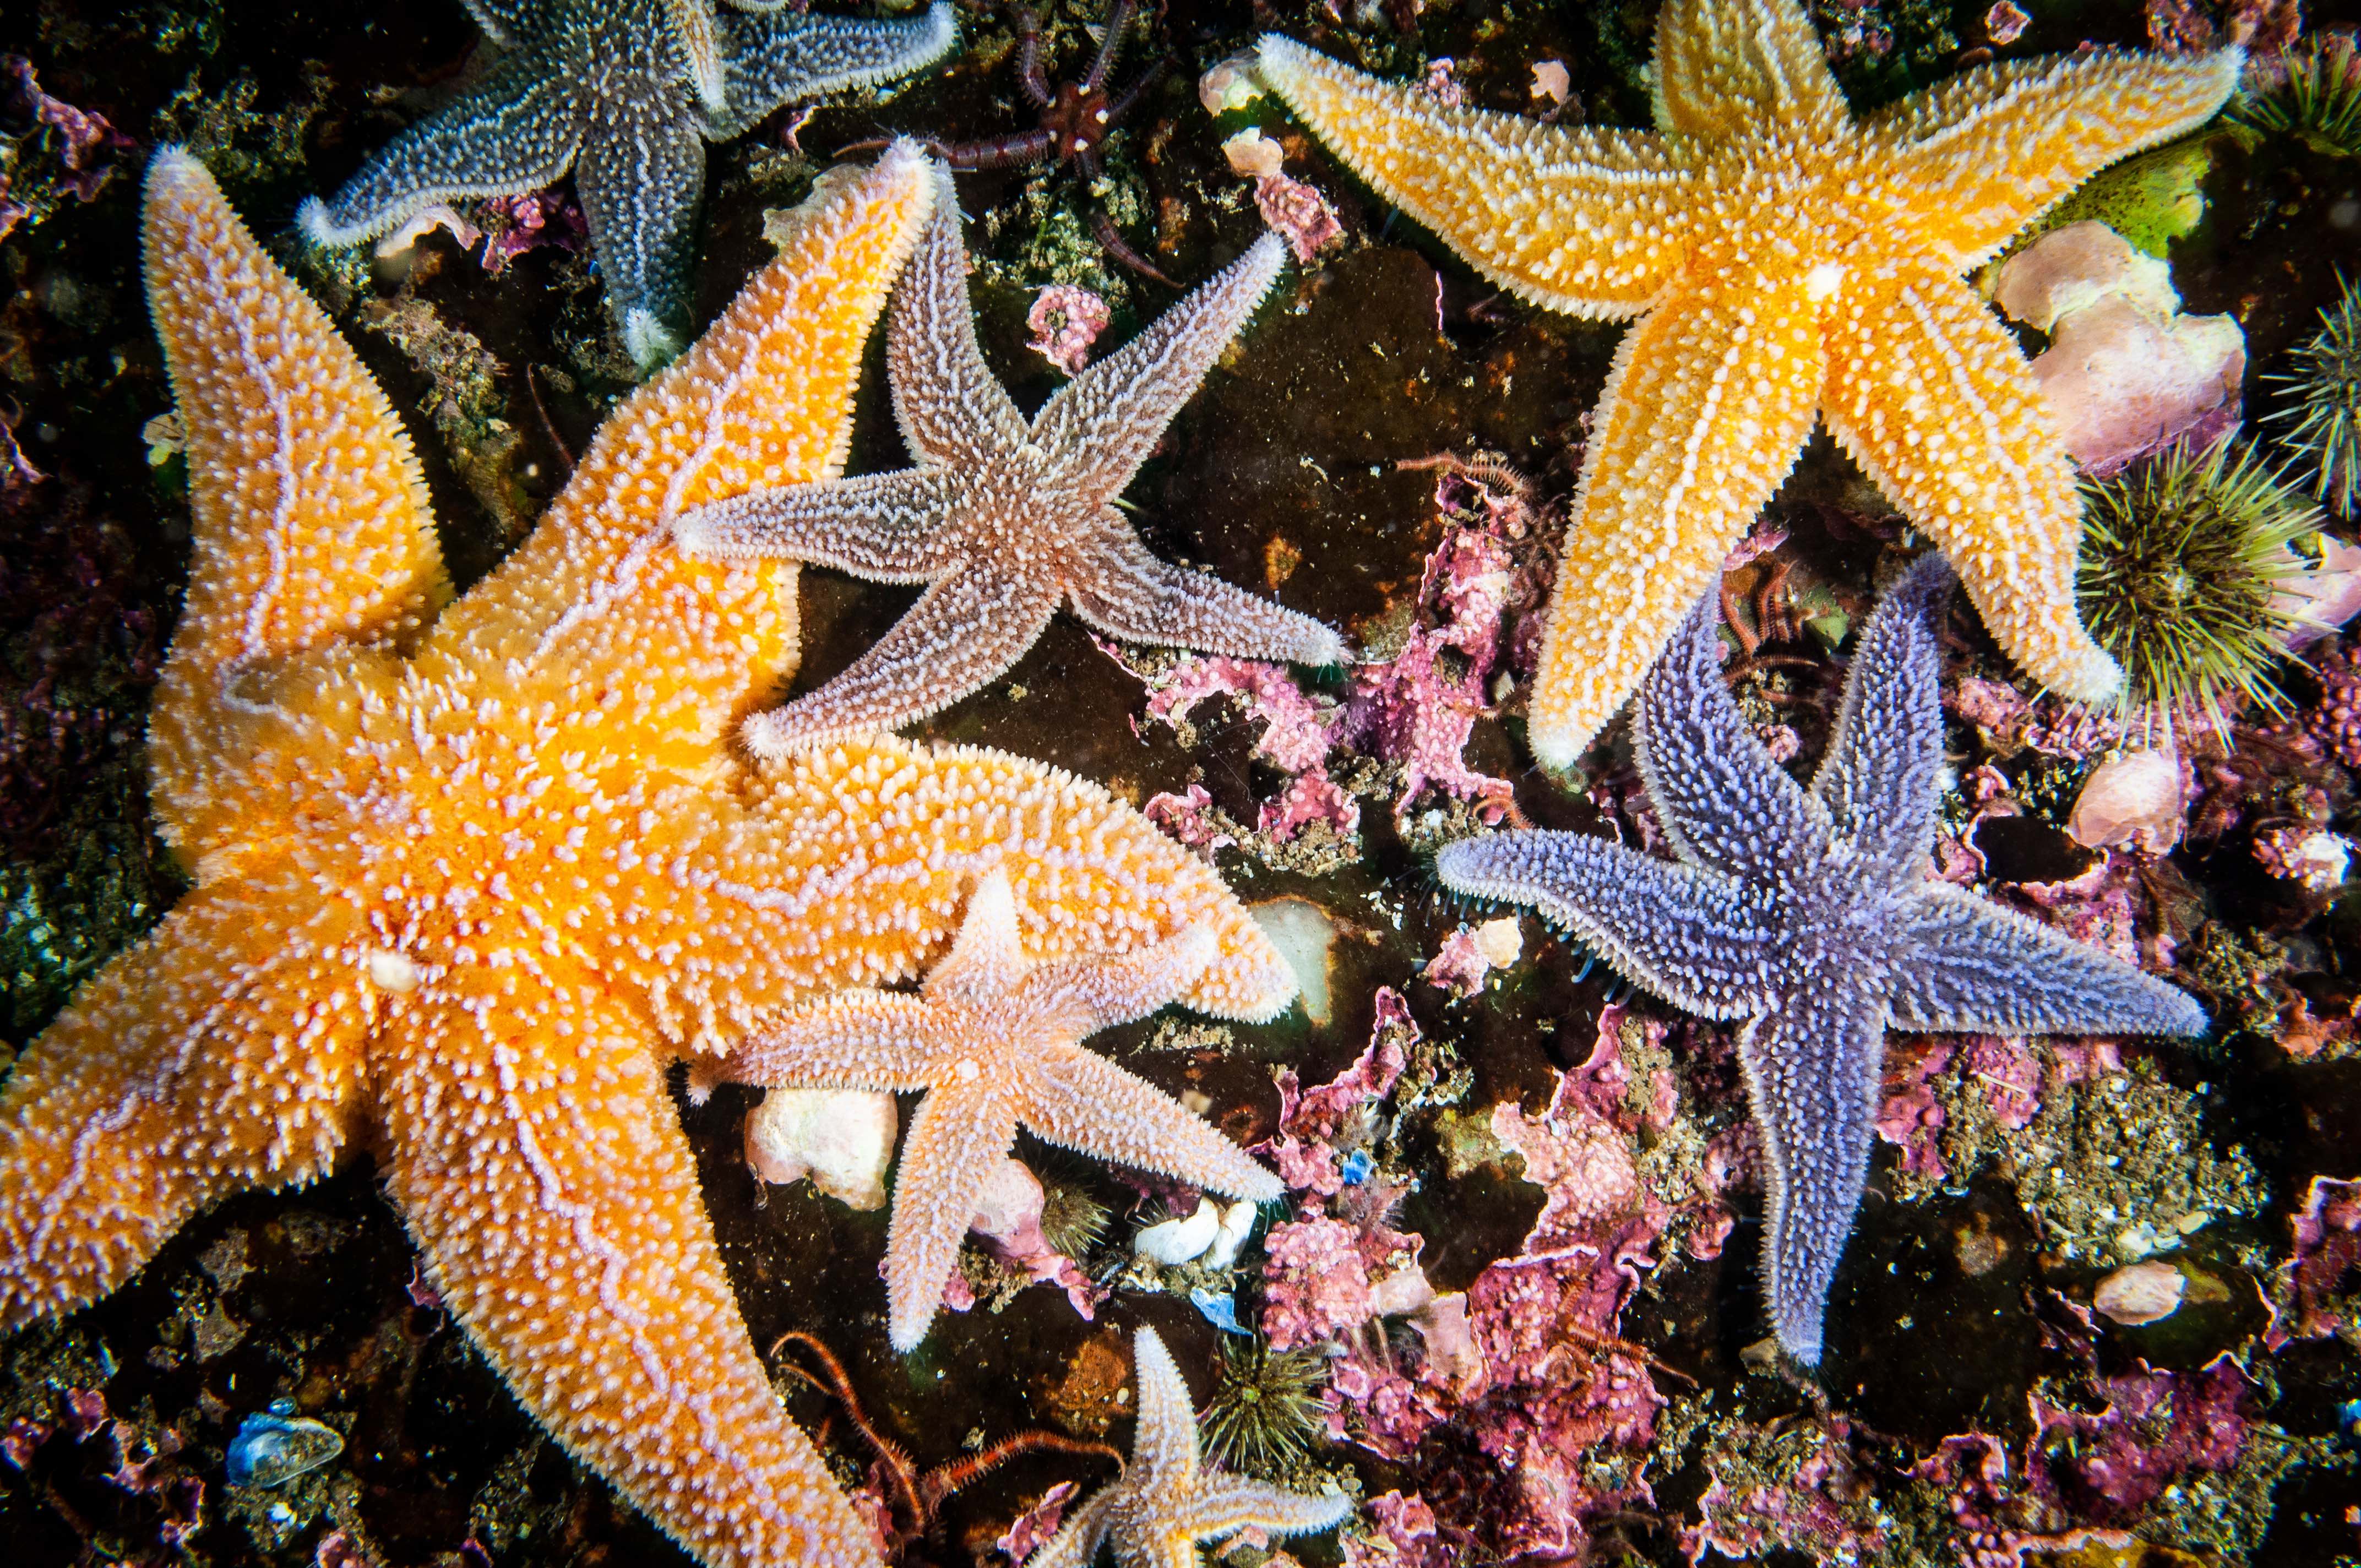 50 Types of Starfish With Pictures 